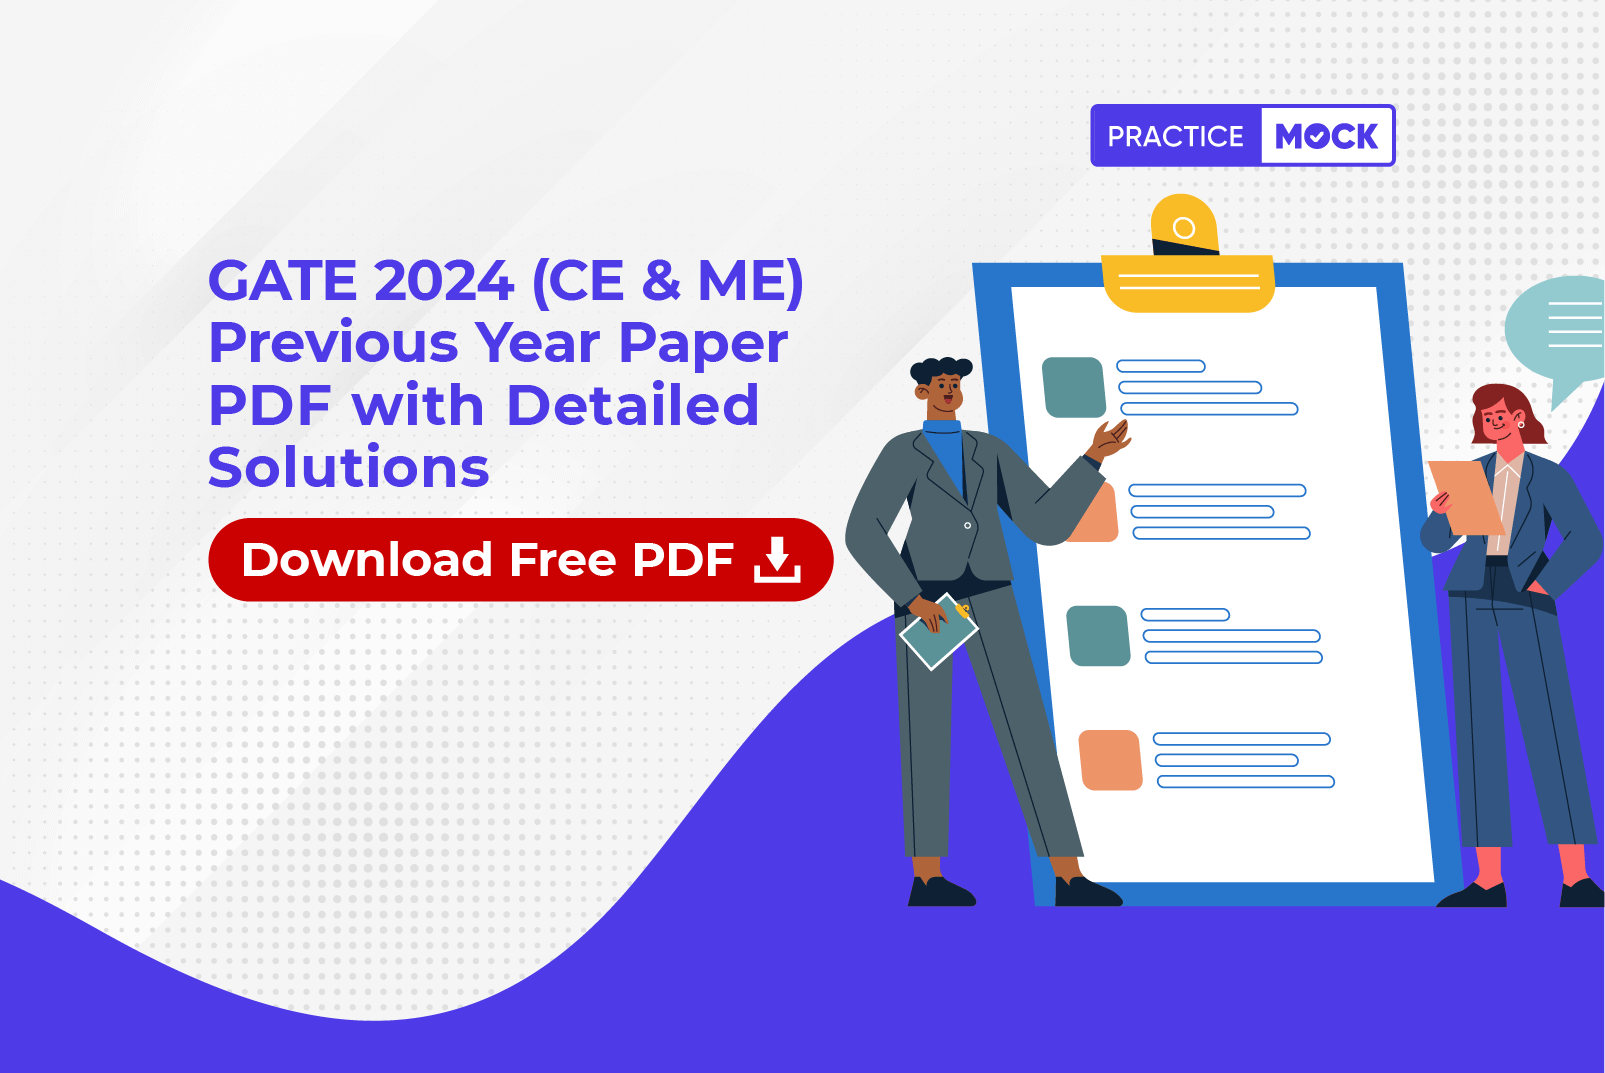 GATE 2024 Previous Year Paper PDF with Detailed Solutions-Download Free PDF